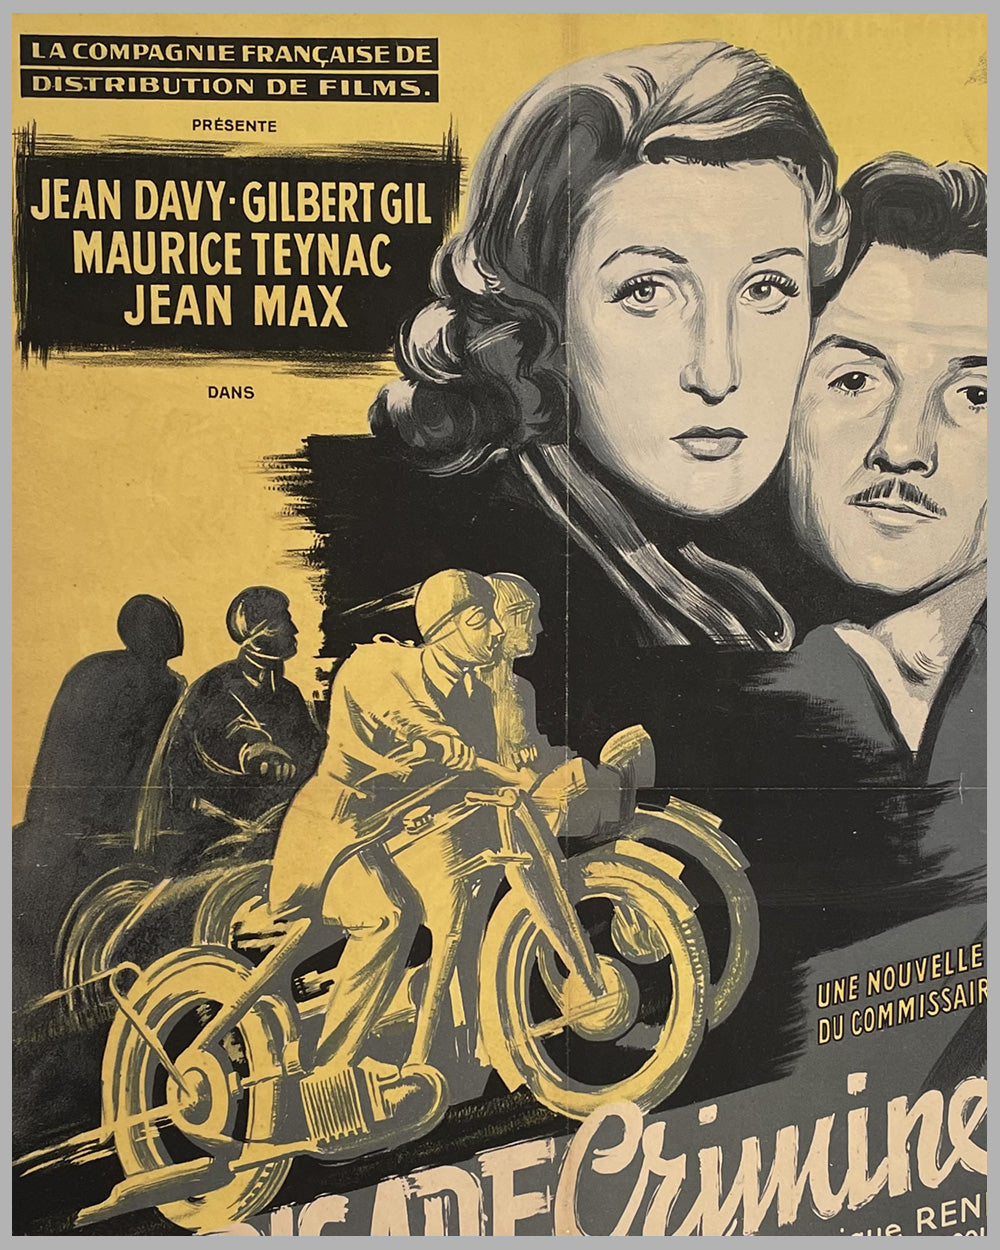 Fall Guy (1947) movie poster